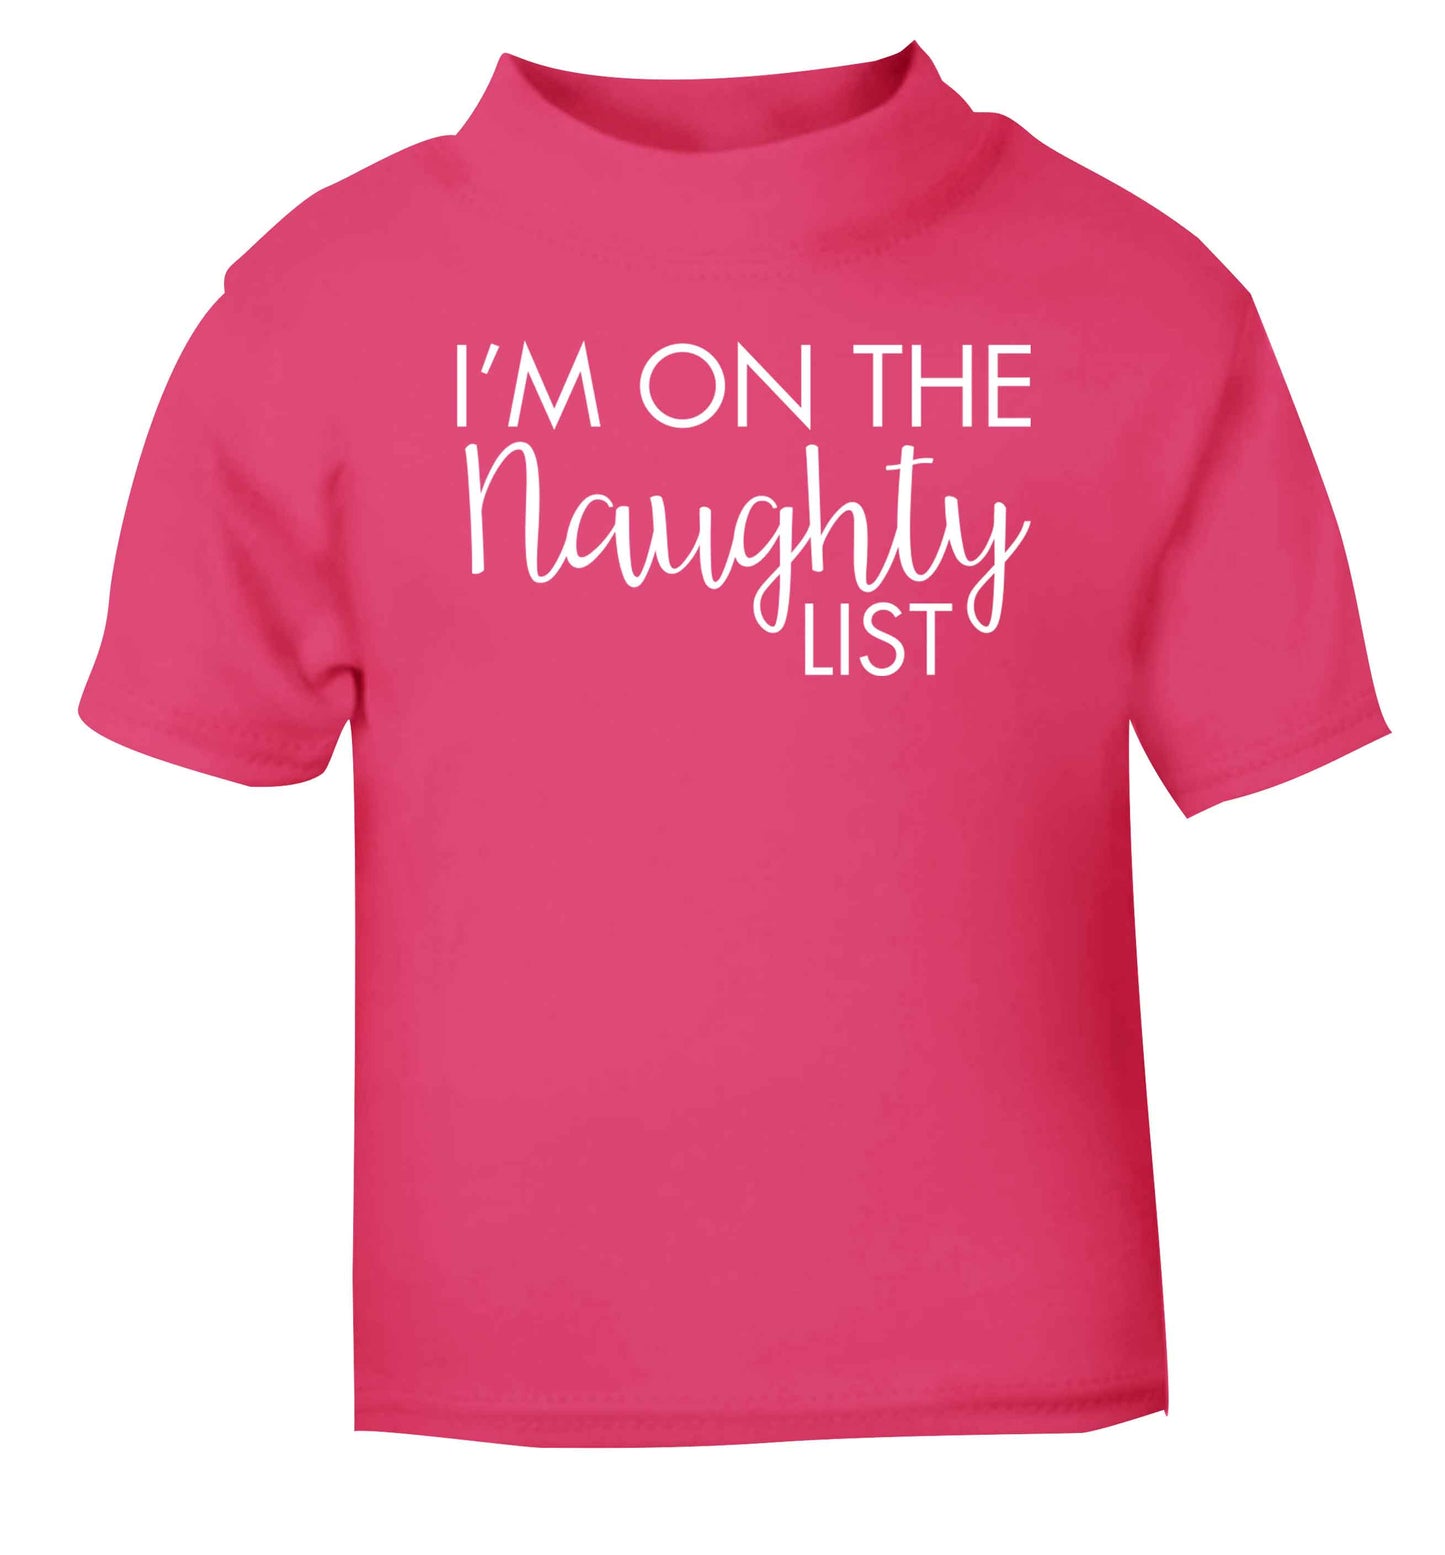 I'm on the naughty list pink baby toddler Tshirt 2 Years